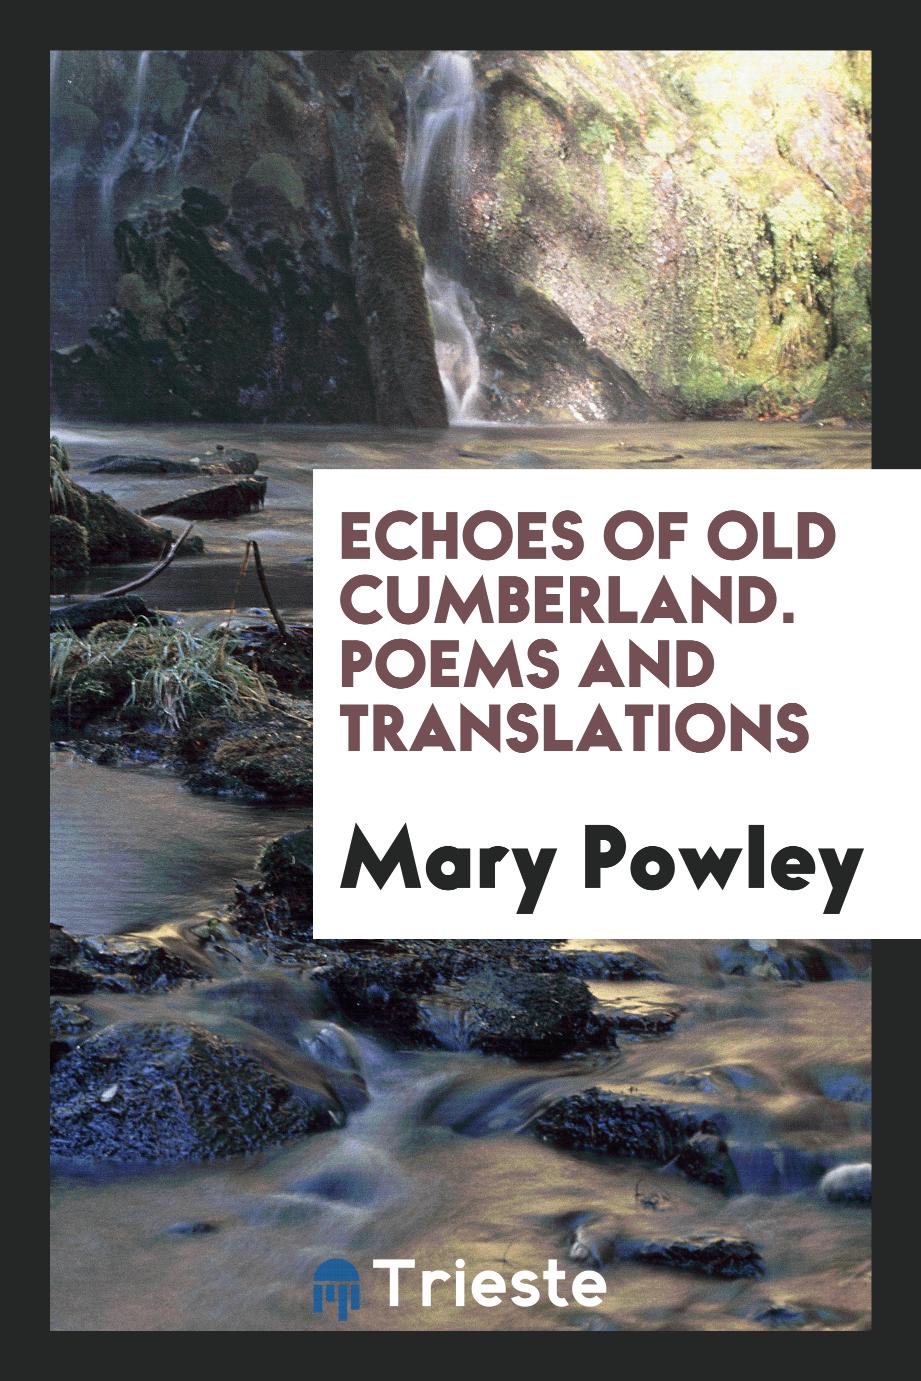 Echoes of old Cumberland. Poems and translations